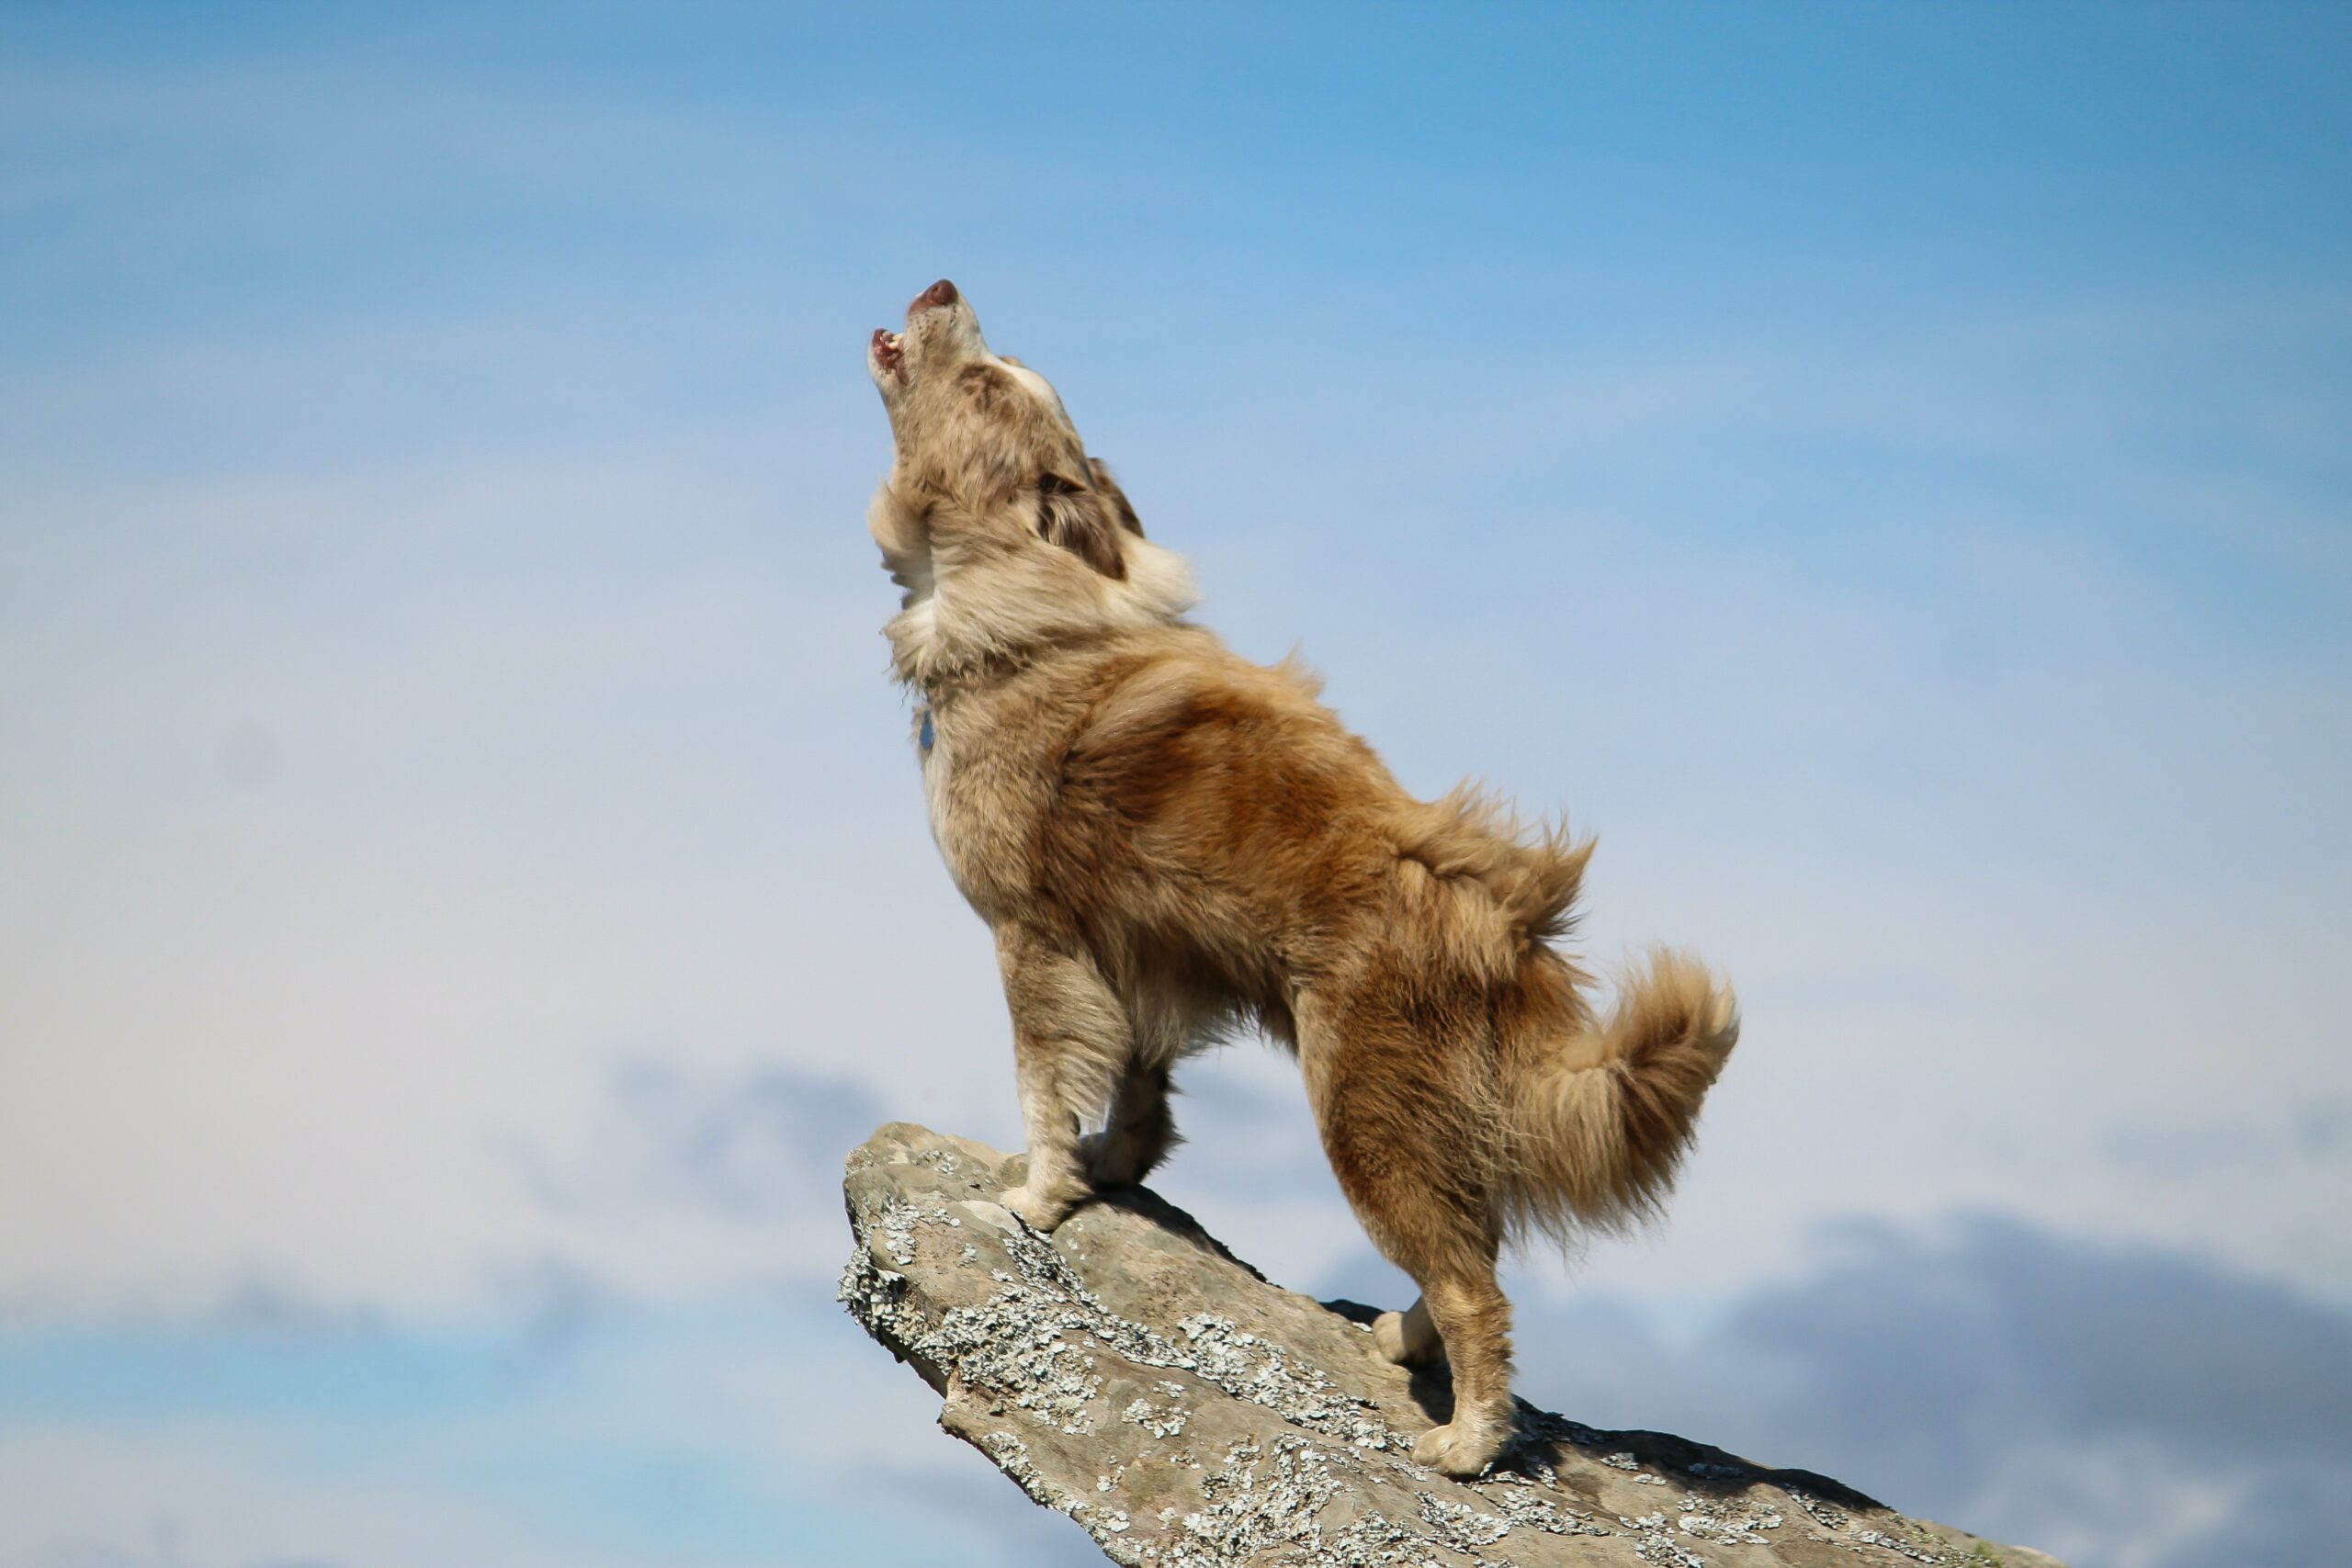 Why Do Dogs Howl? The Evolutionary Link Between Wolves and Dogs